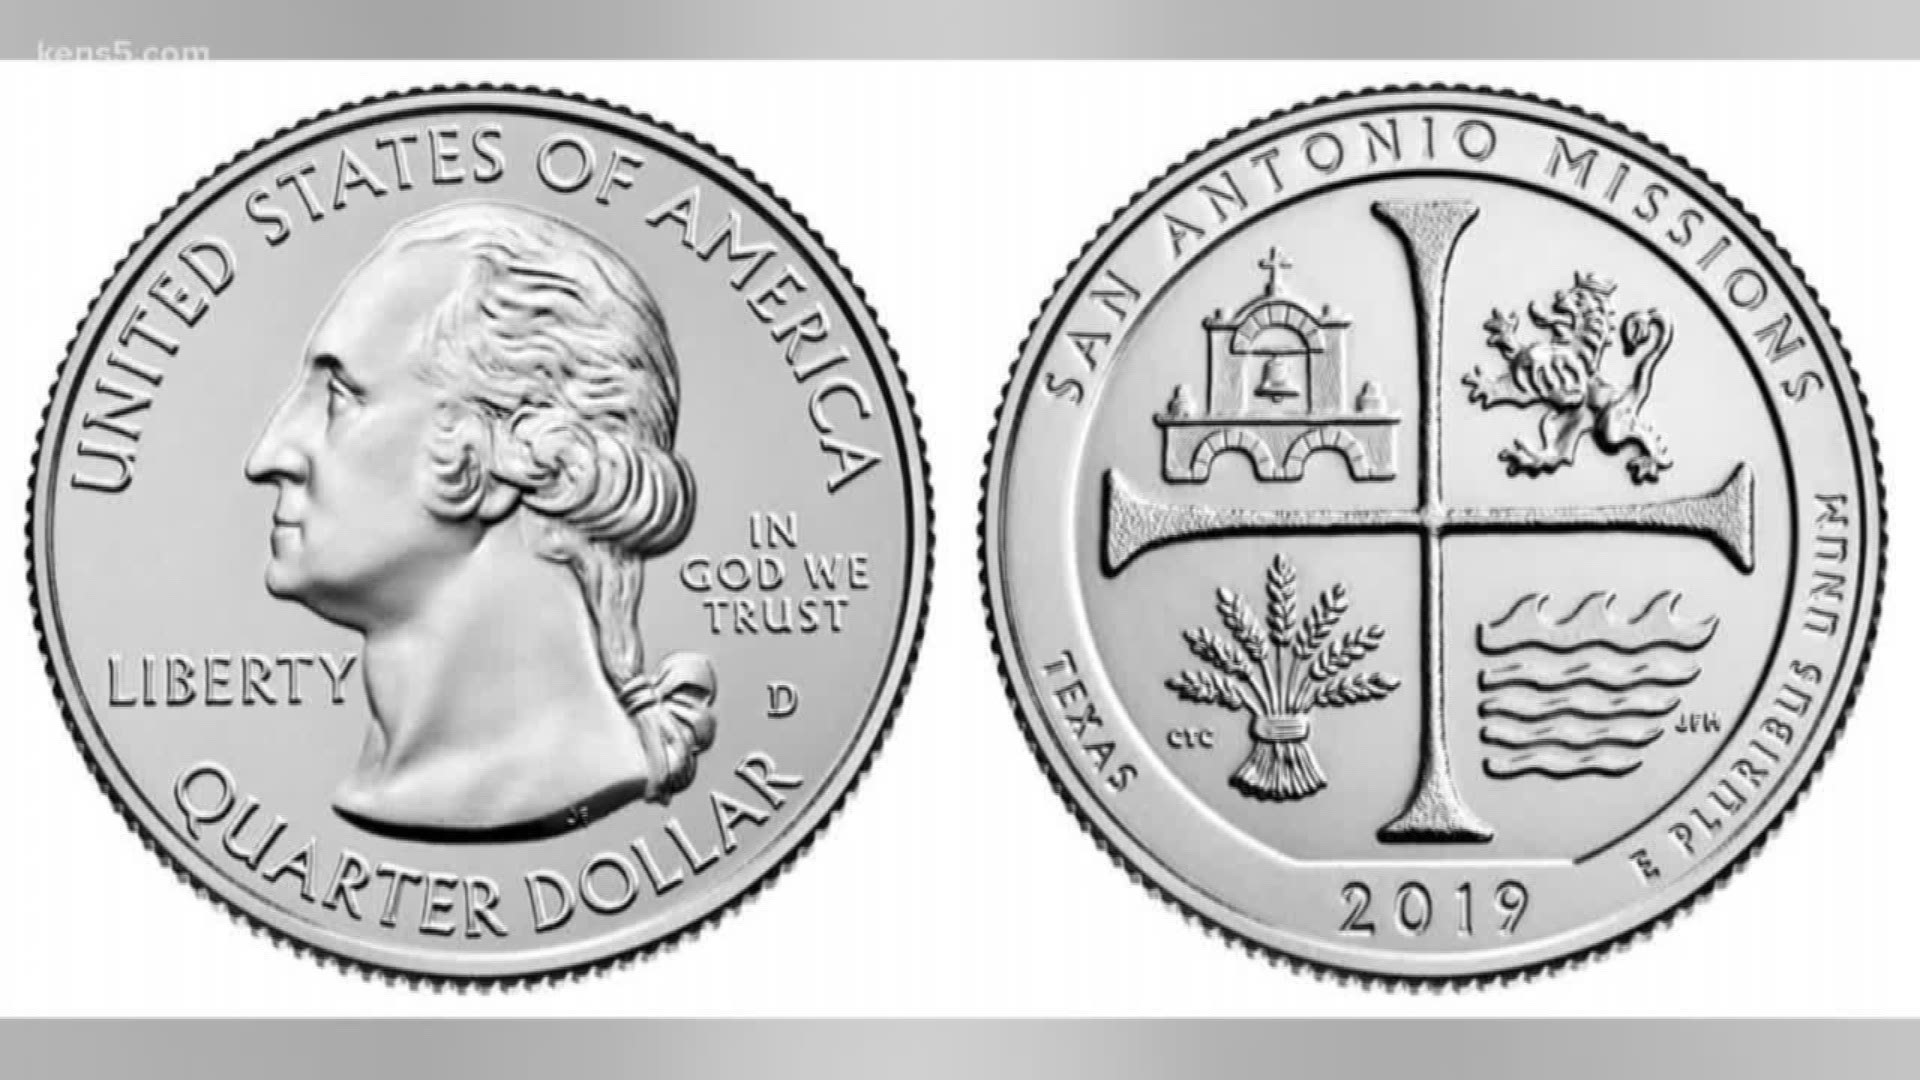 The special coin is the 49th in the America the Beautiful Quarters program.